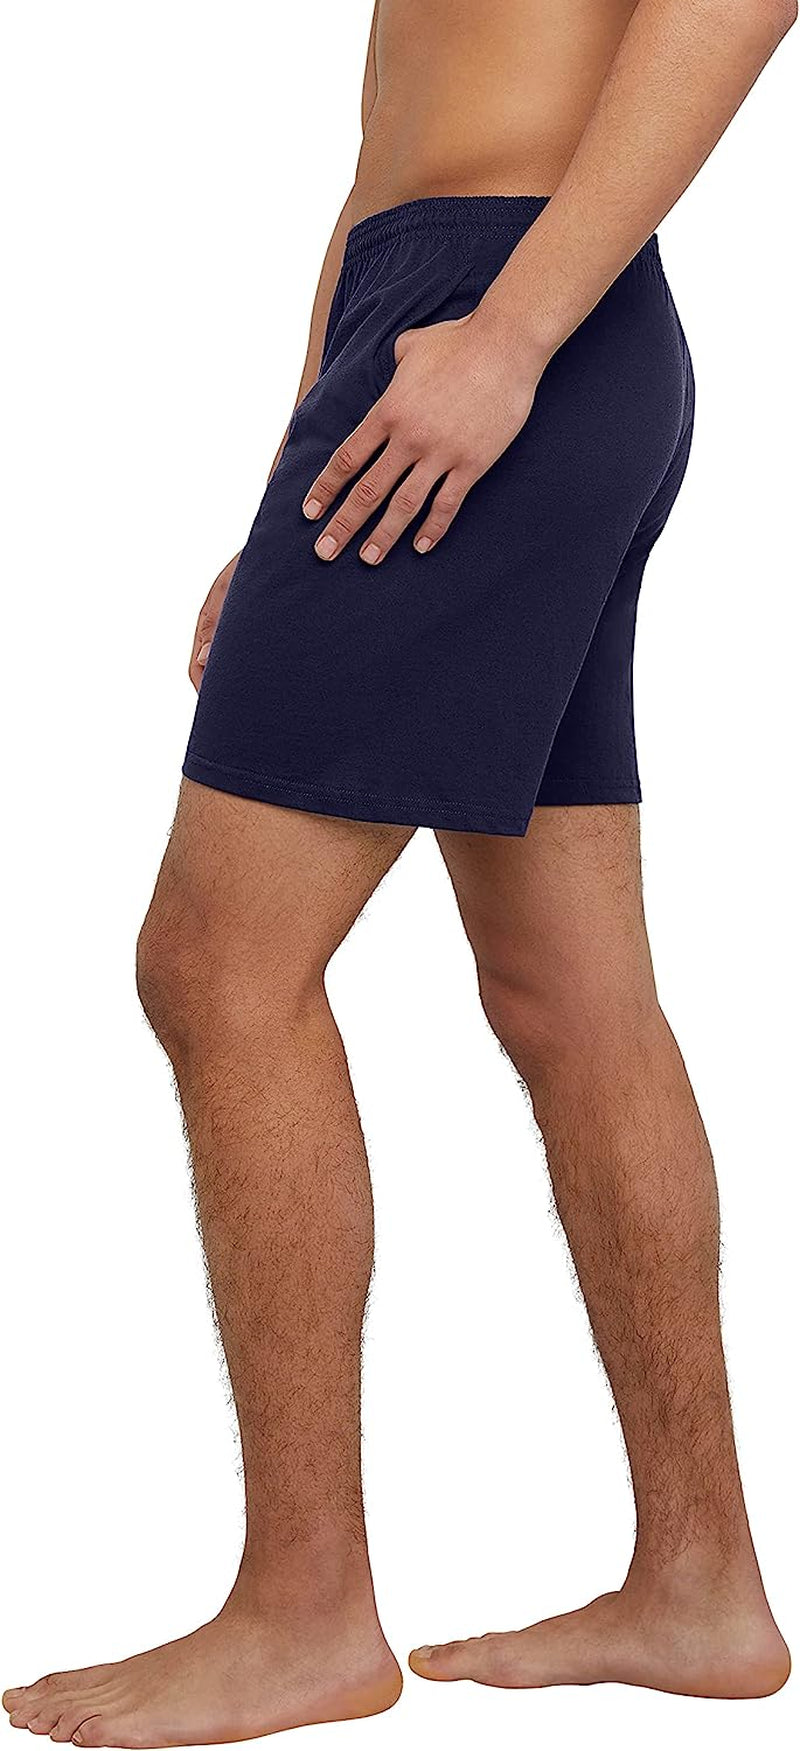 Men's Athletic Shorts, Favorite Cotton Jersey Shorts, Pull-On Knit Shorts with Pockets, Knit Gym Shorts, 7.5" Inseam